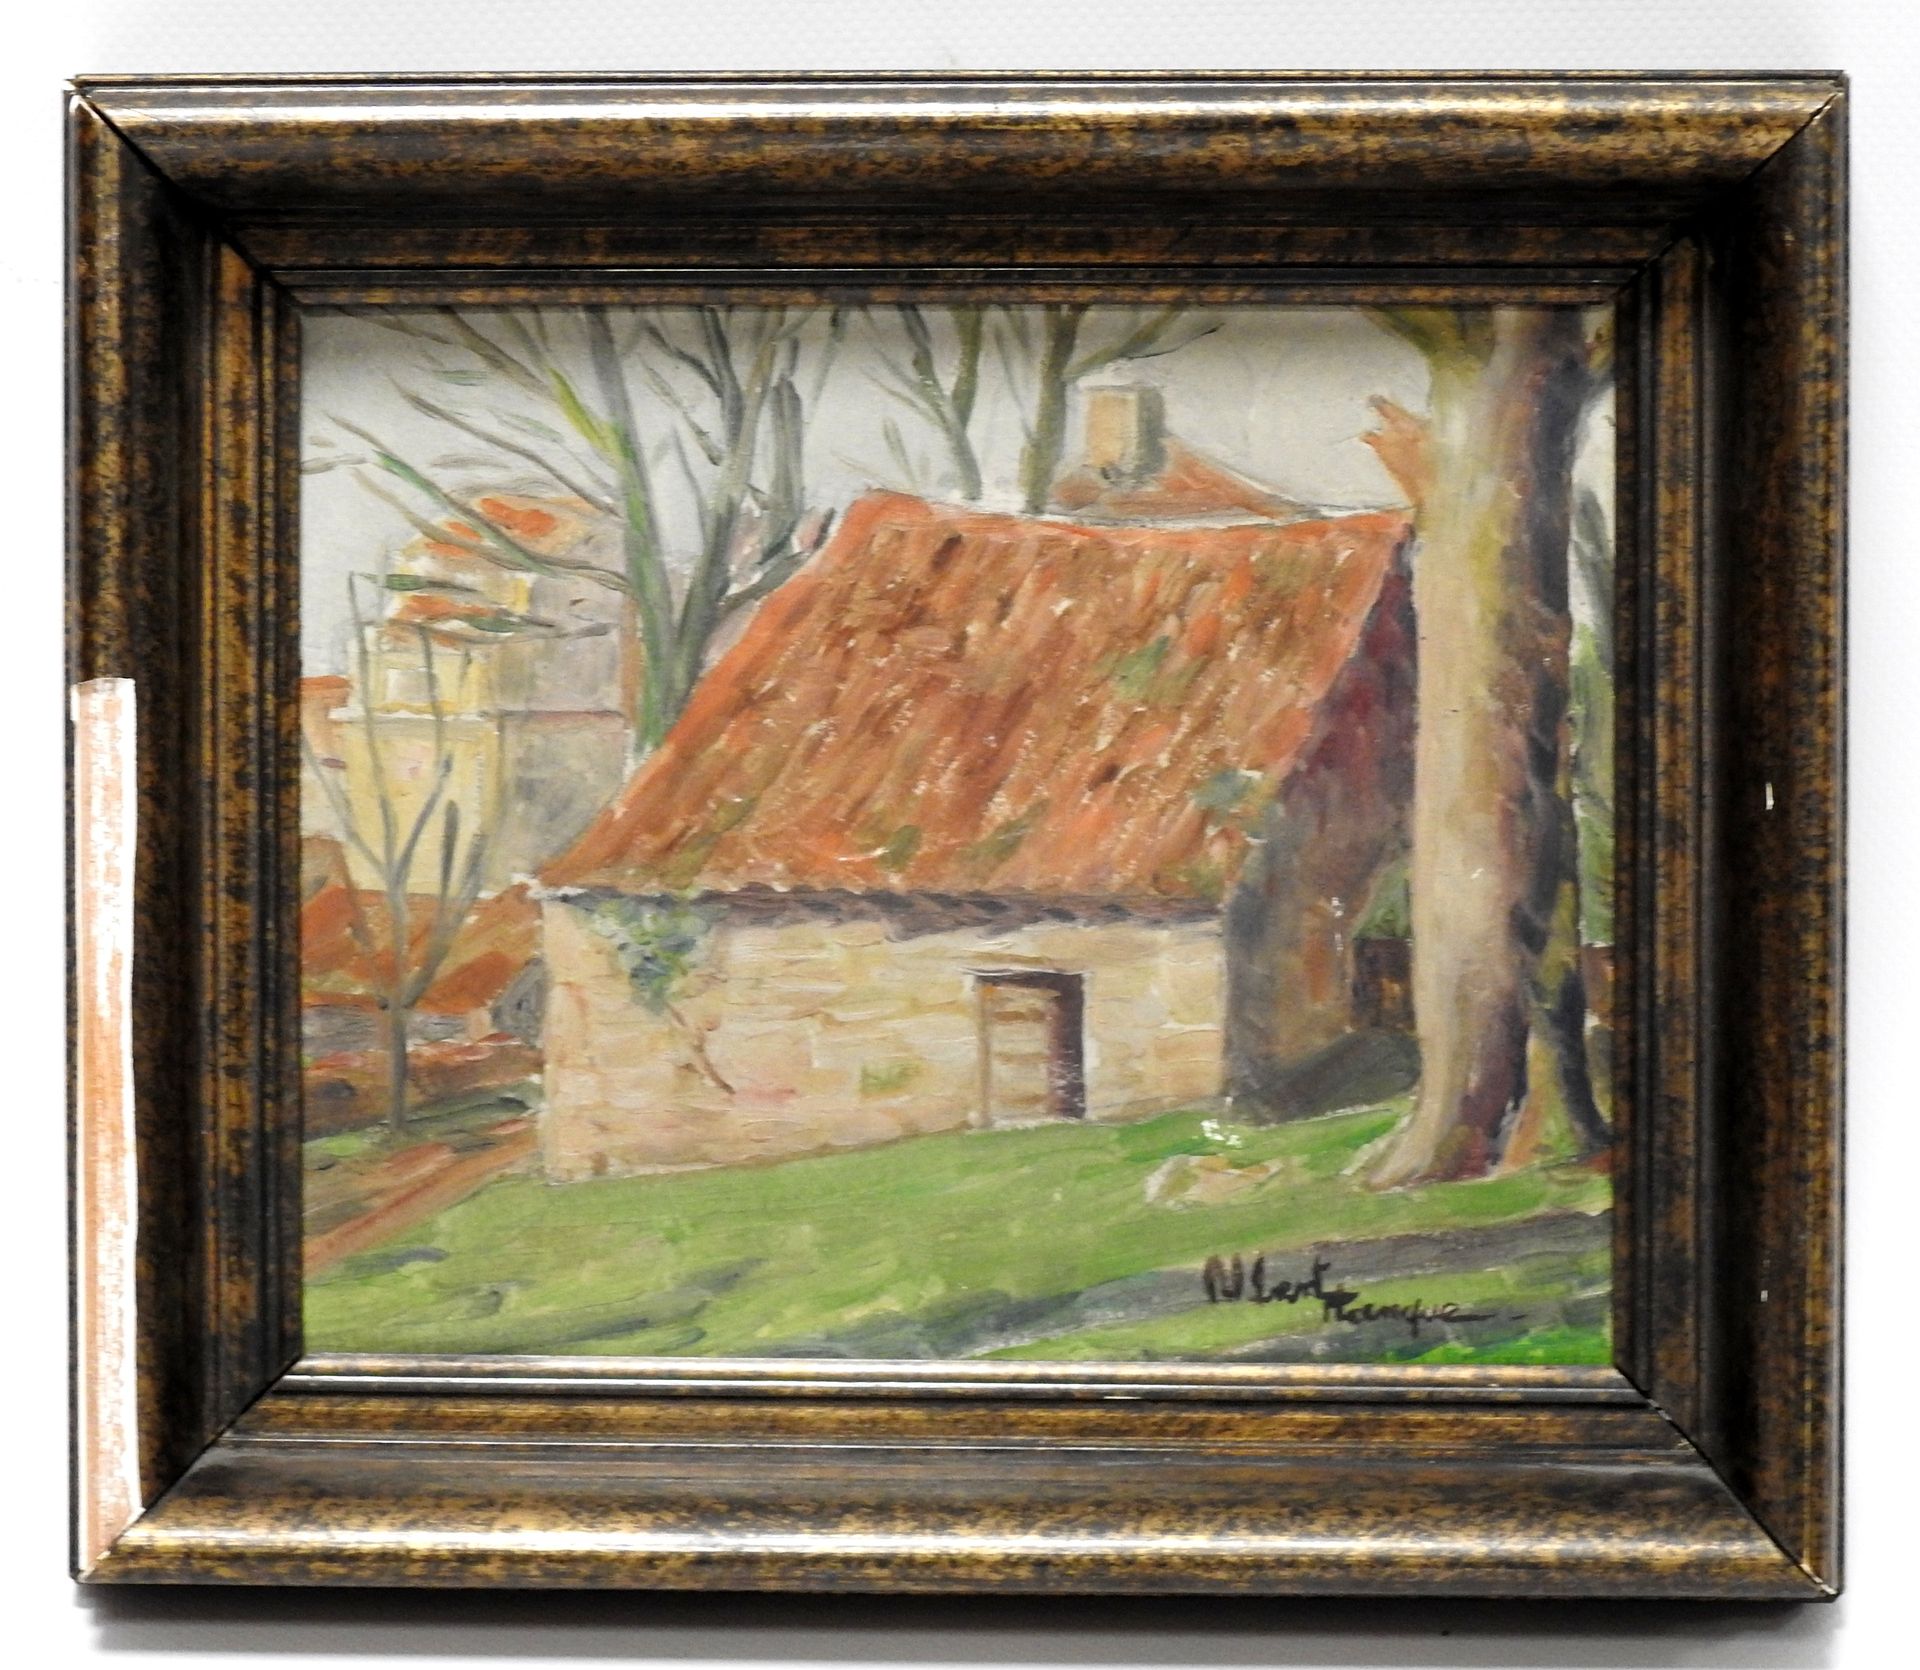 Null Albert PLANQUE - XXth century
Factory at the foot of a tree.
Oil on cardboa&hellip;